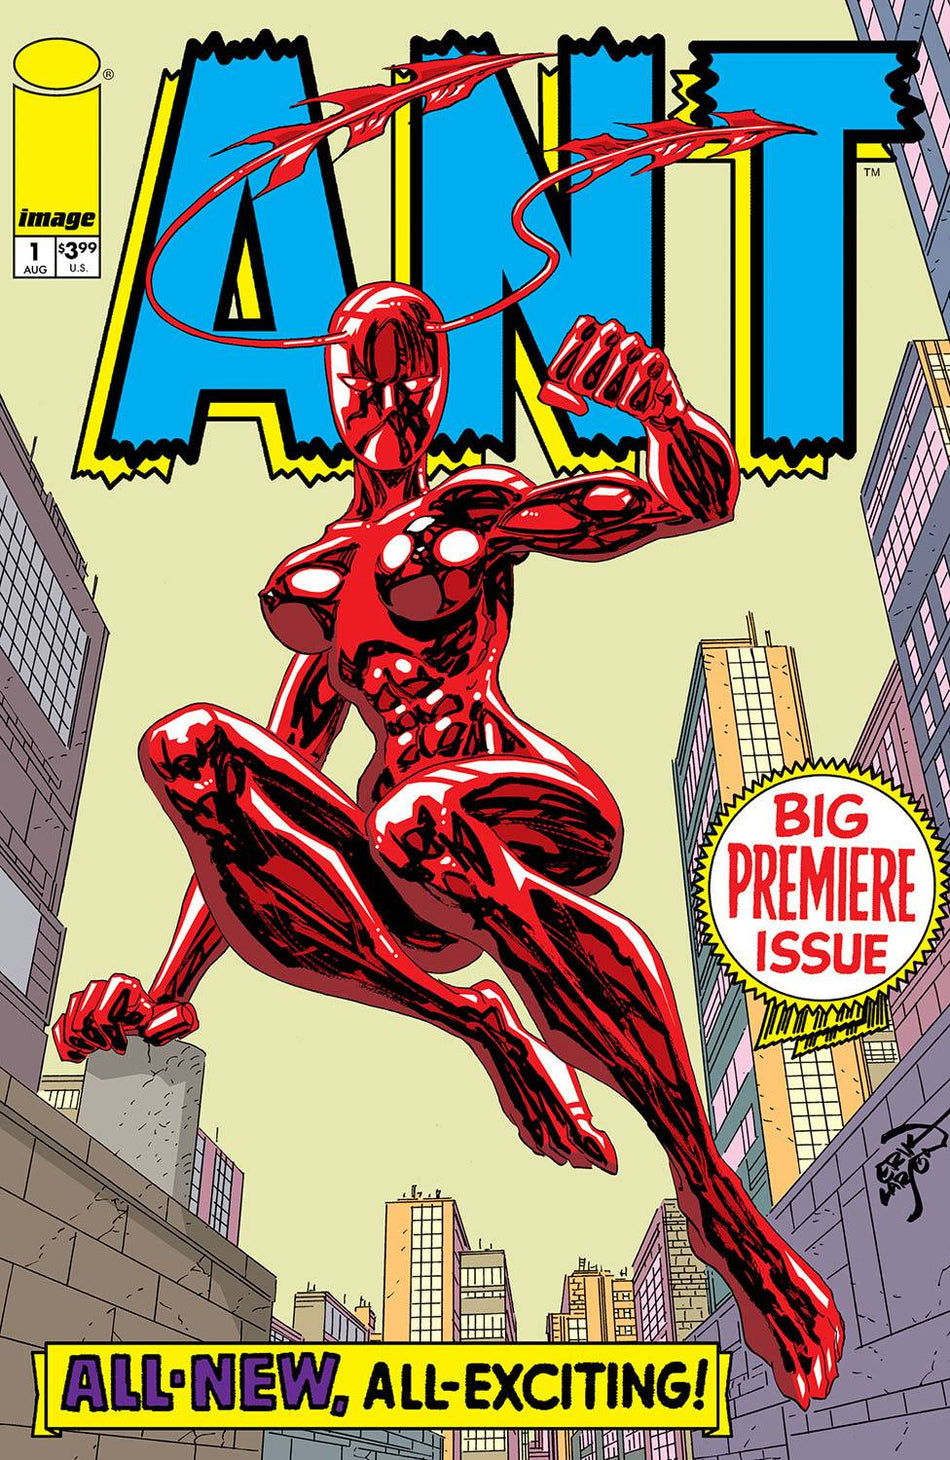 Photo of Ant Issue 1 CVR A Larsen comic sold by Stronghold Collectibles